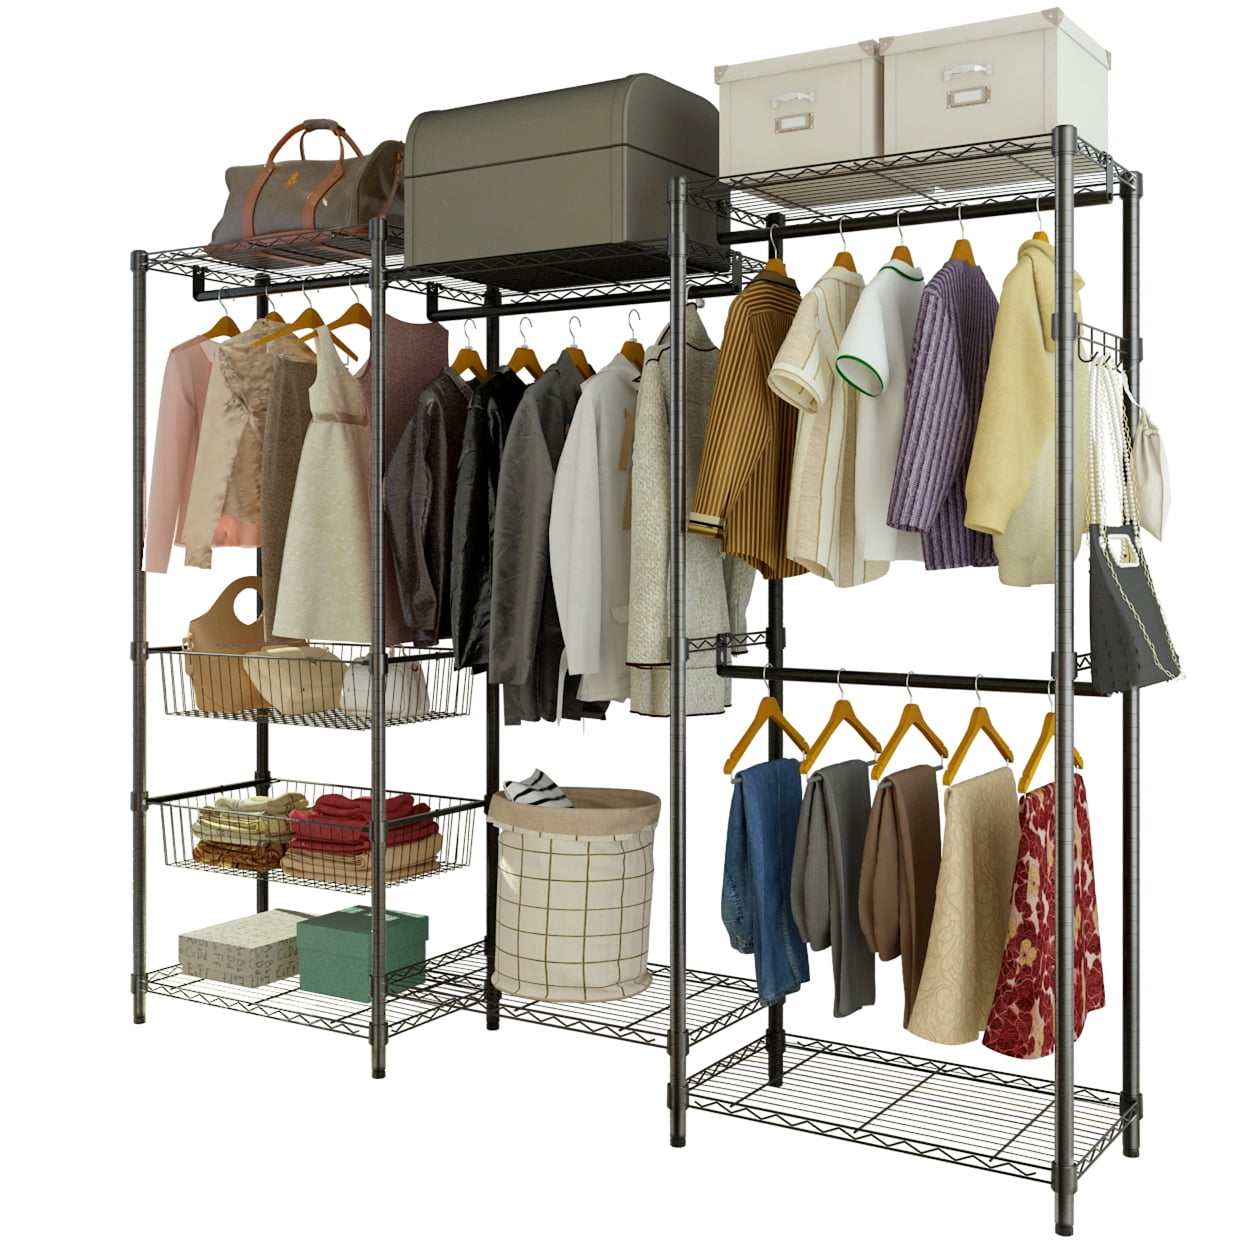 Ubesgoo Standing Closet Garment Rack Made of Sturdy Carbon Steel with Spacious Storage Space, Clothes Hanging Rods, Heavy Duty Clothes Organizer for